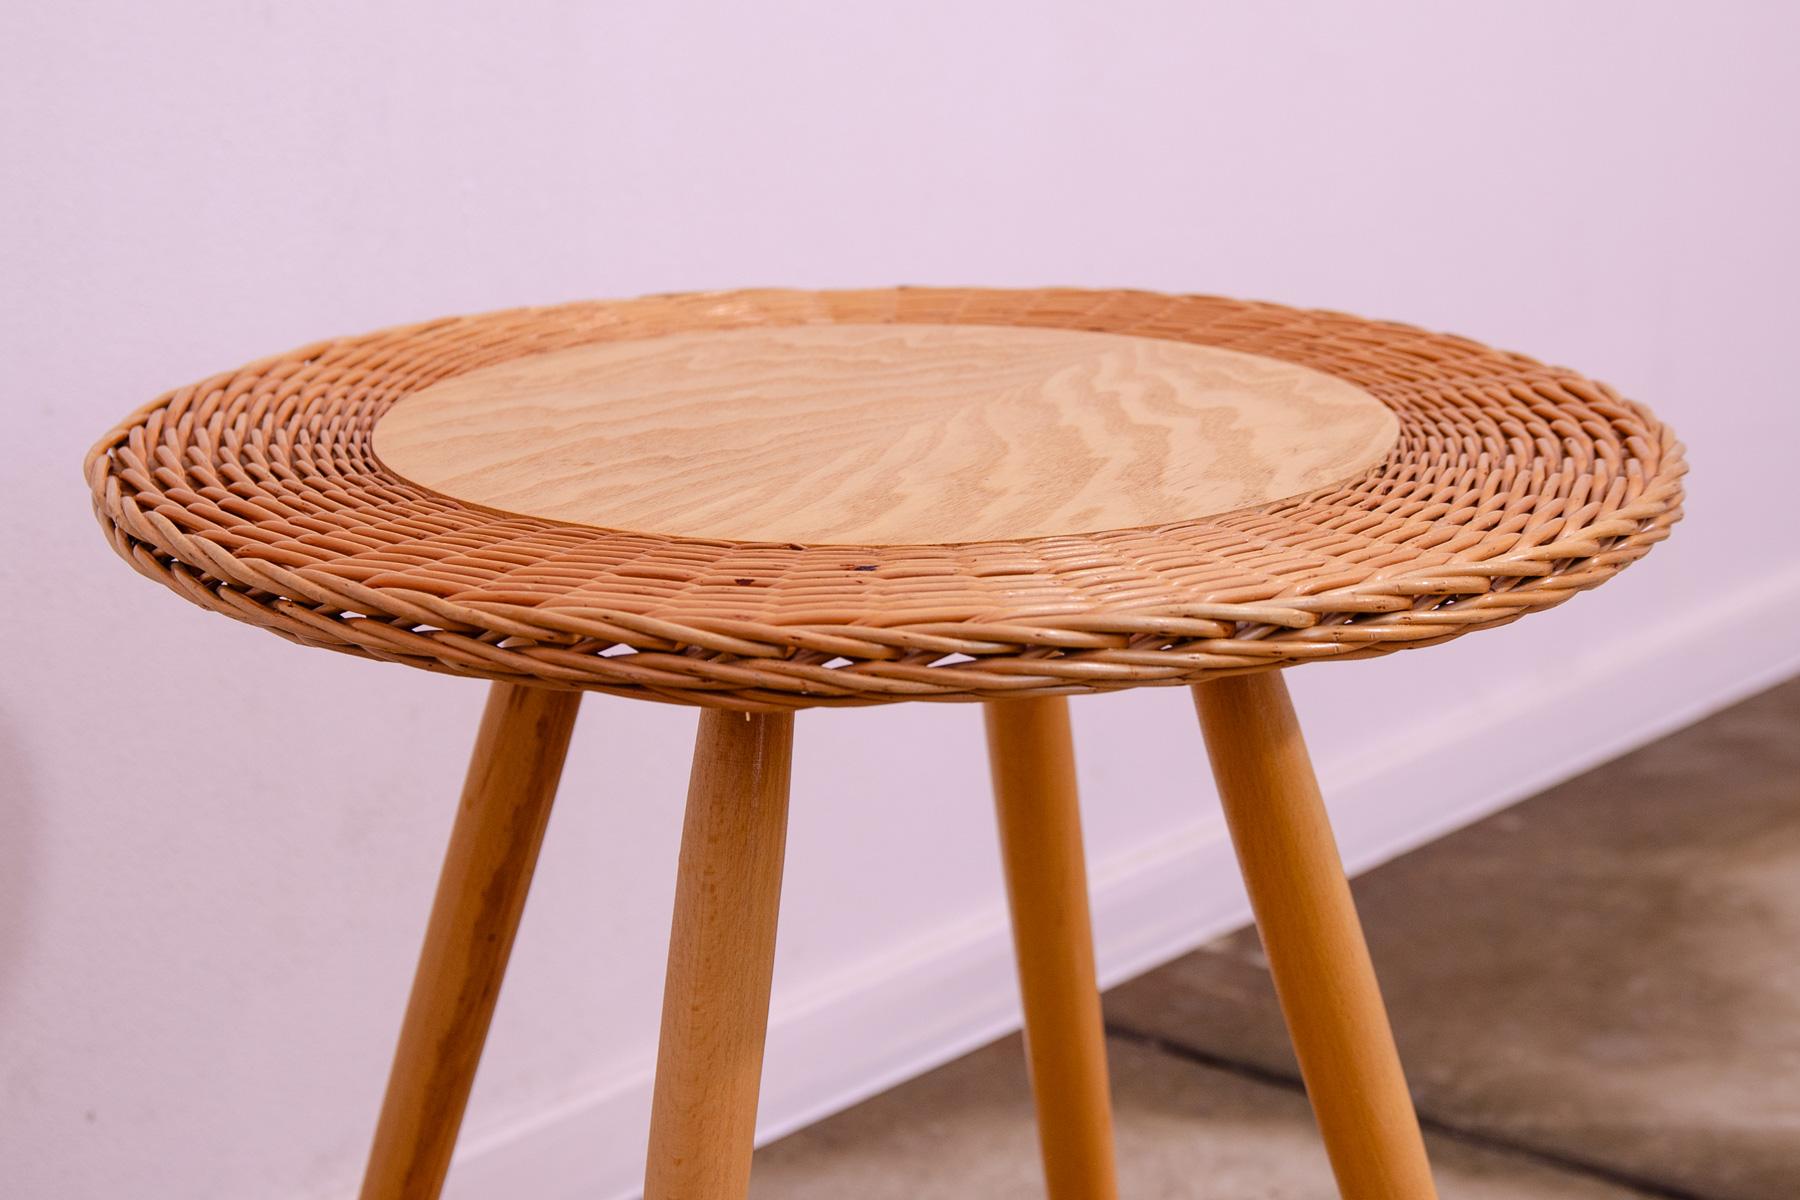 Czechoslovak rattan coffee table designed by Jan Kalous for ÚLUV in the 1960´s.  Very simple and elegant design.  In good Vintage condition, showing signs of age and using.

Height: 56 cm

width: 54 cm

depth: 54 cm